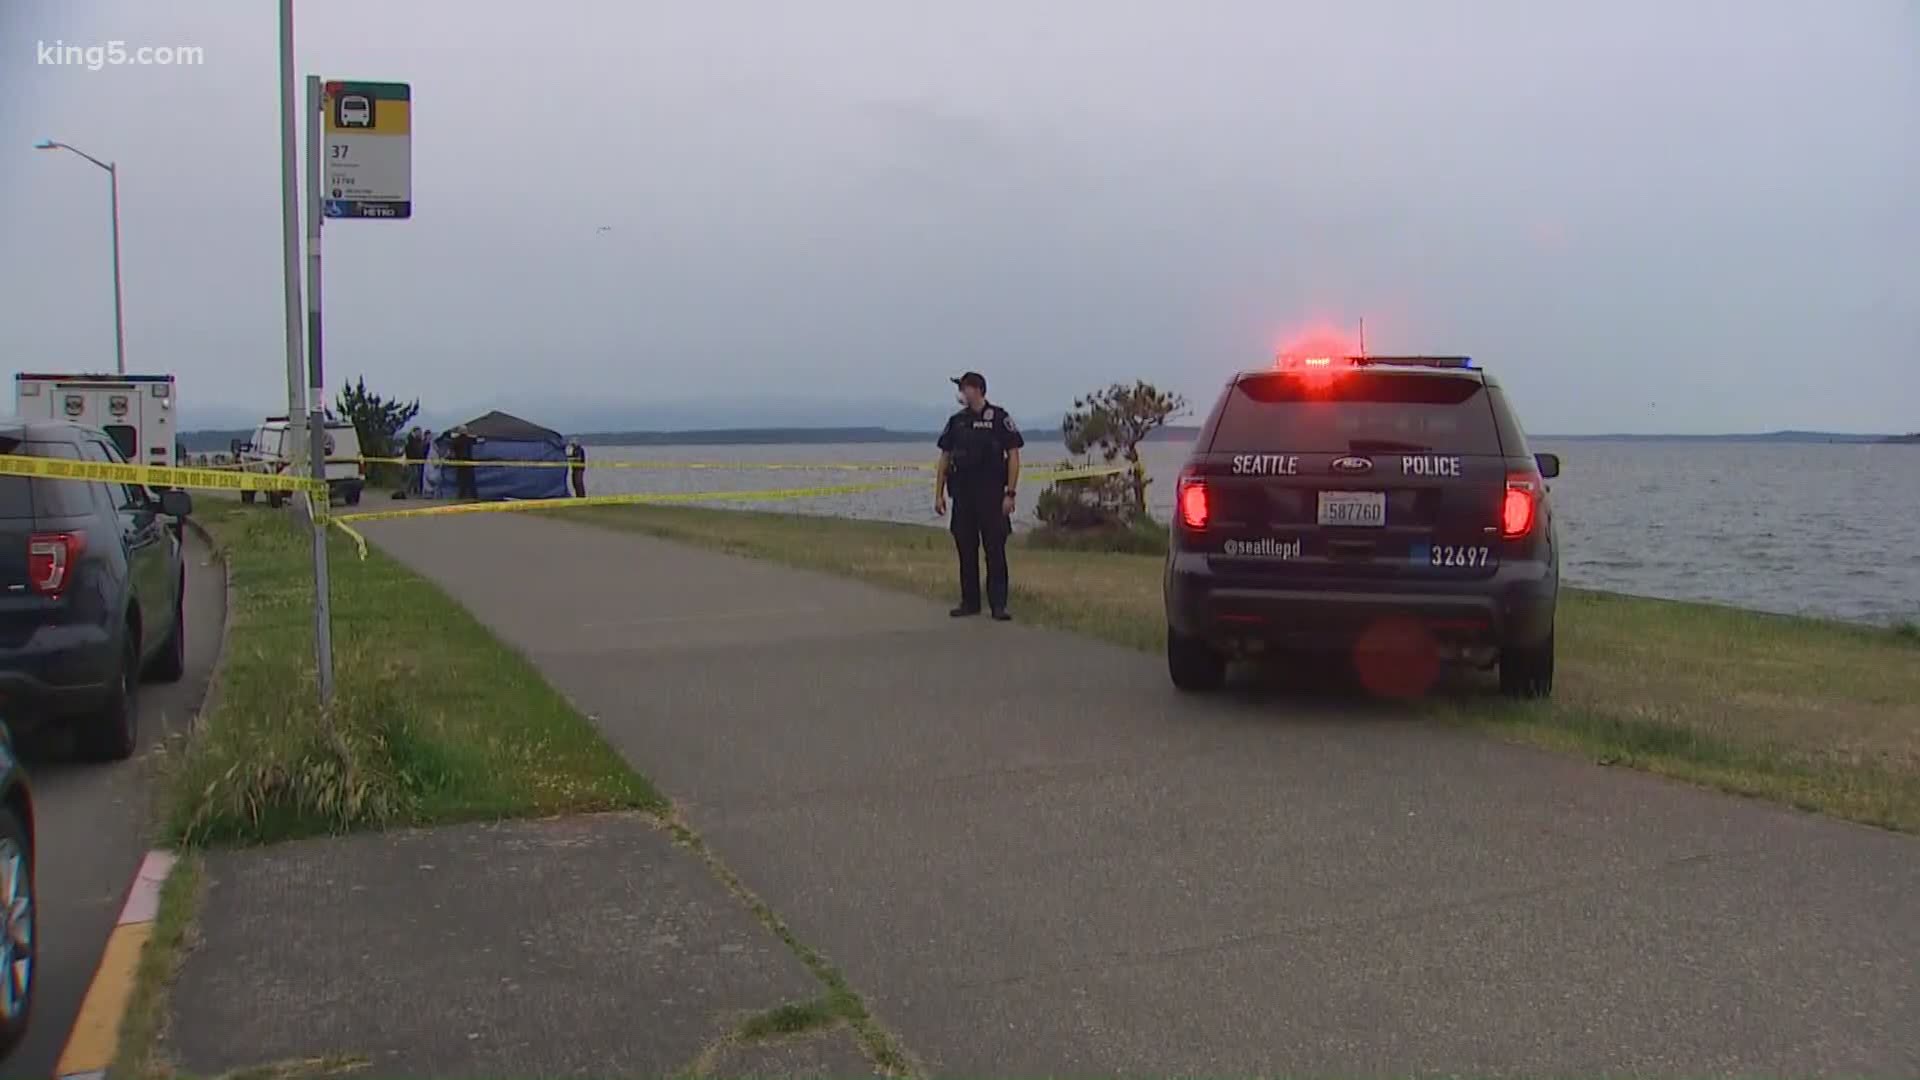 Seattle police responded after getting a call about a suspicious bag on the beach near the water in the area of Luna Park in West Seattle.